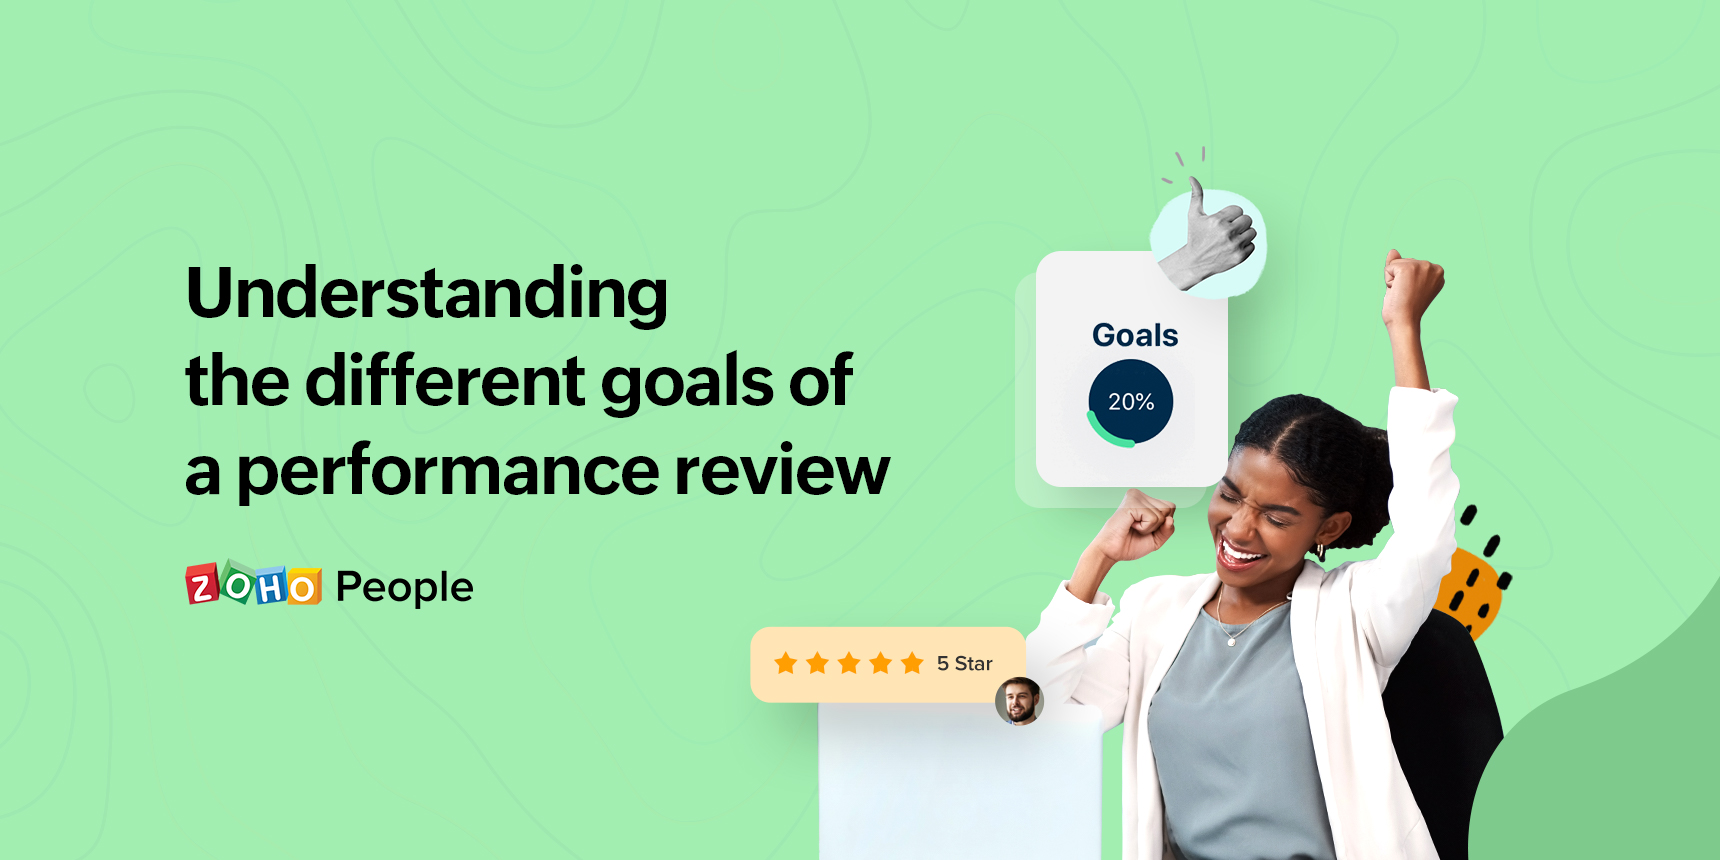 Understanding the goals of a performance review